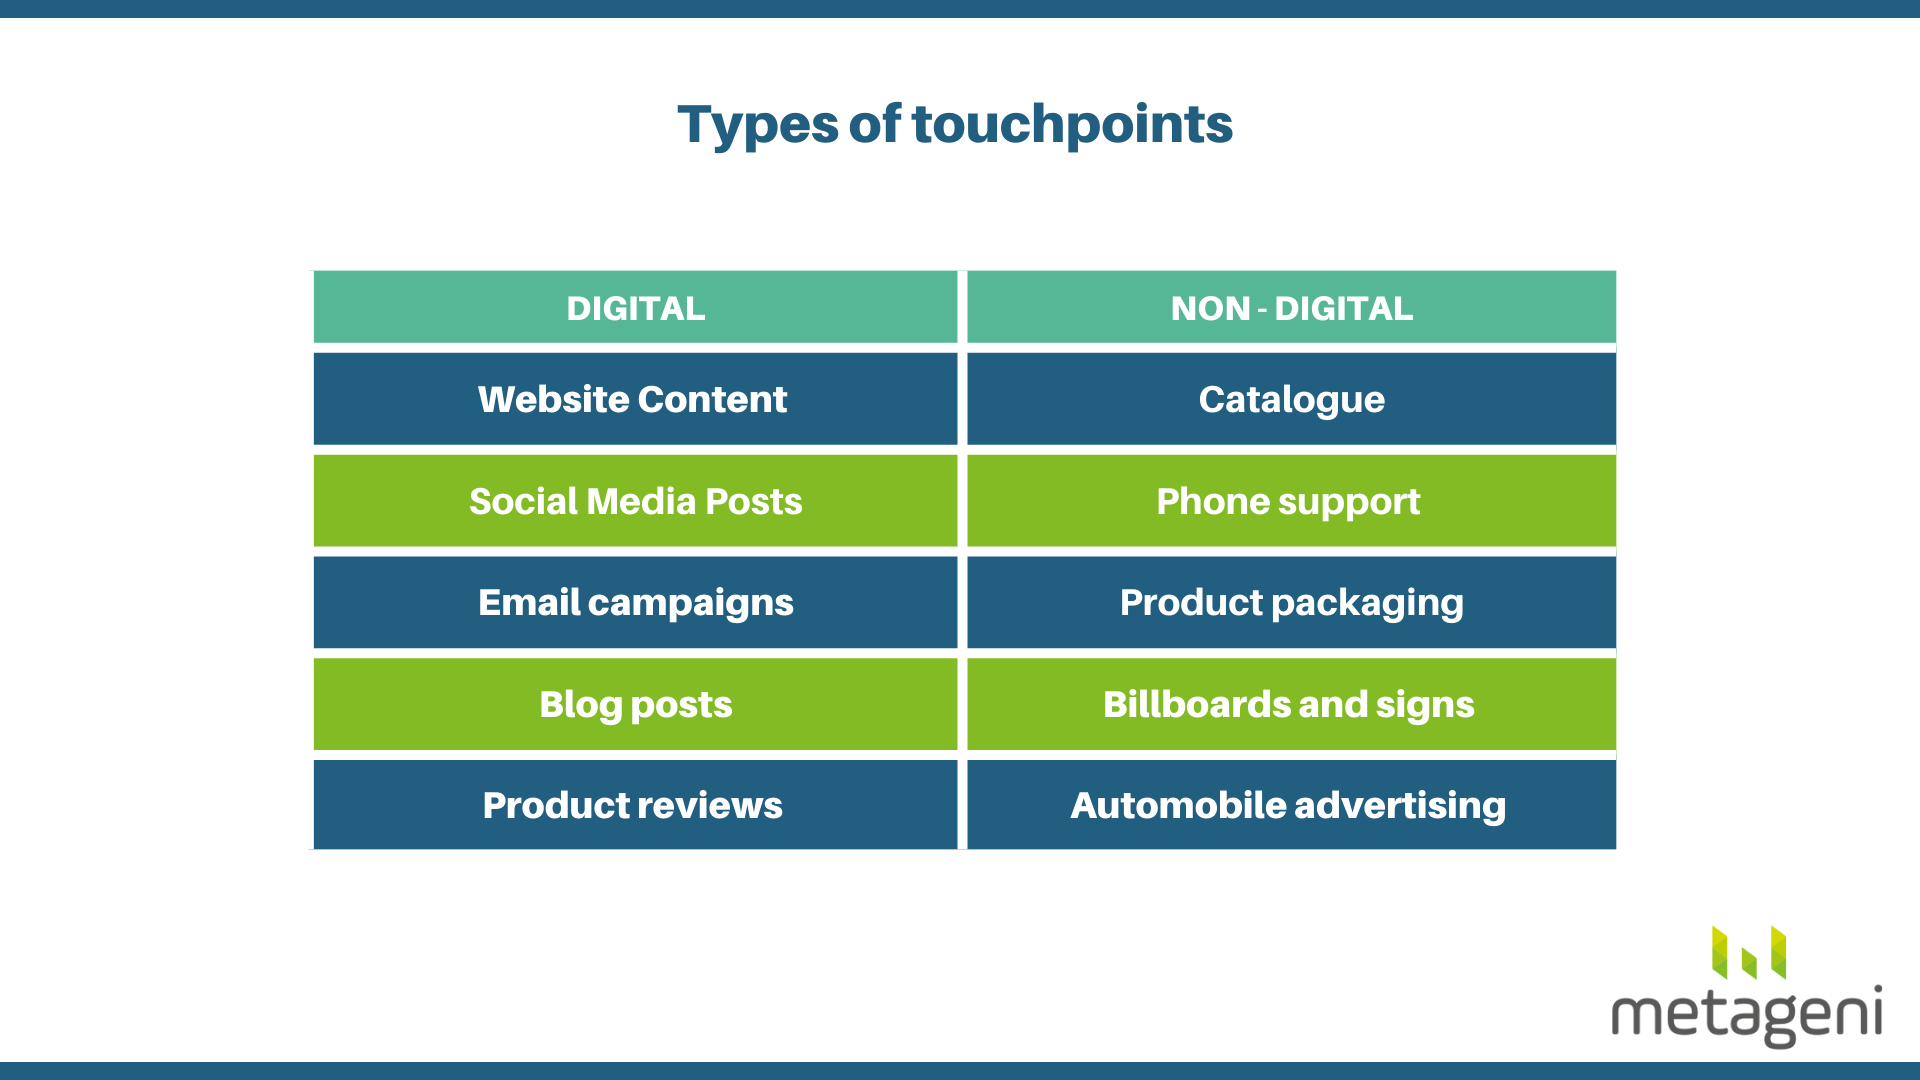 Customer journey touchpoints and attribution 